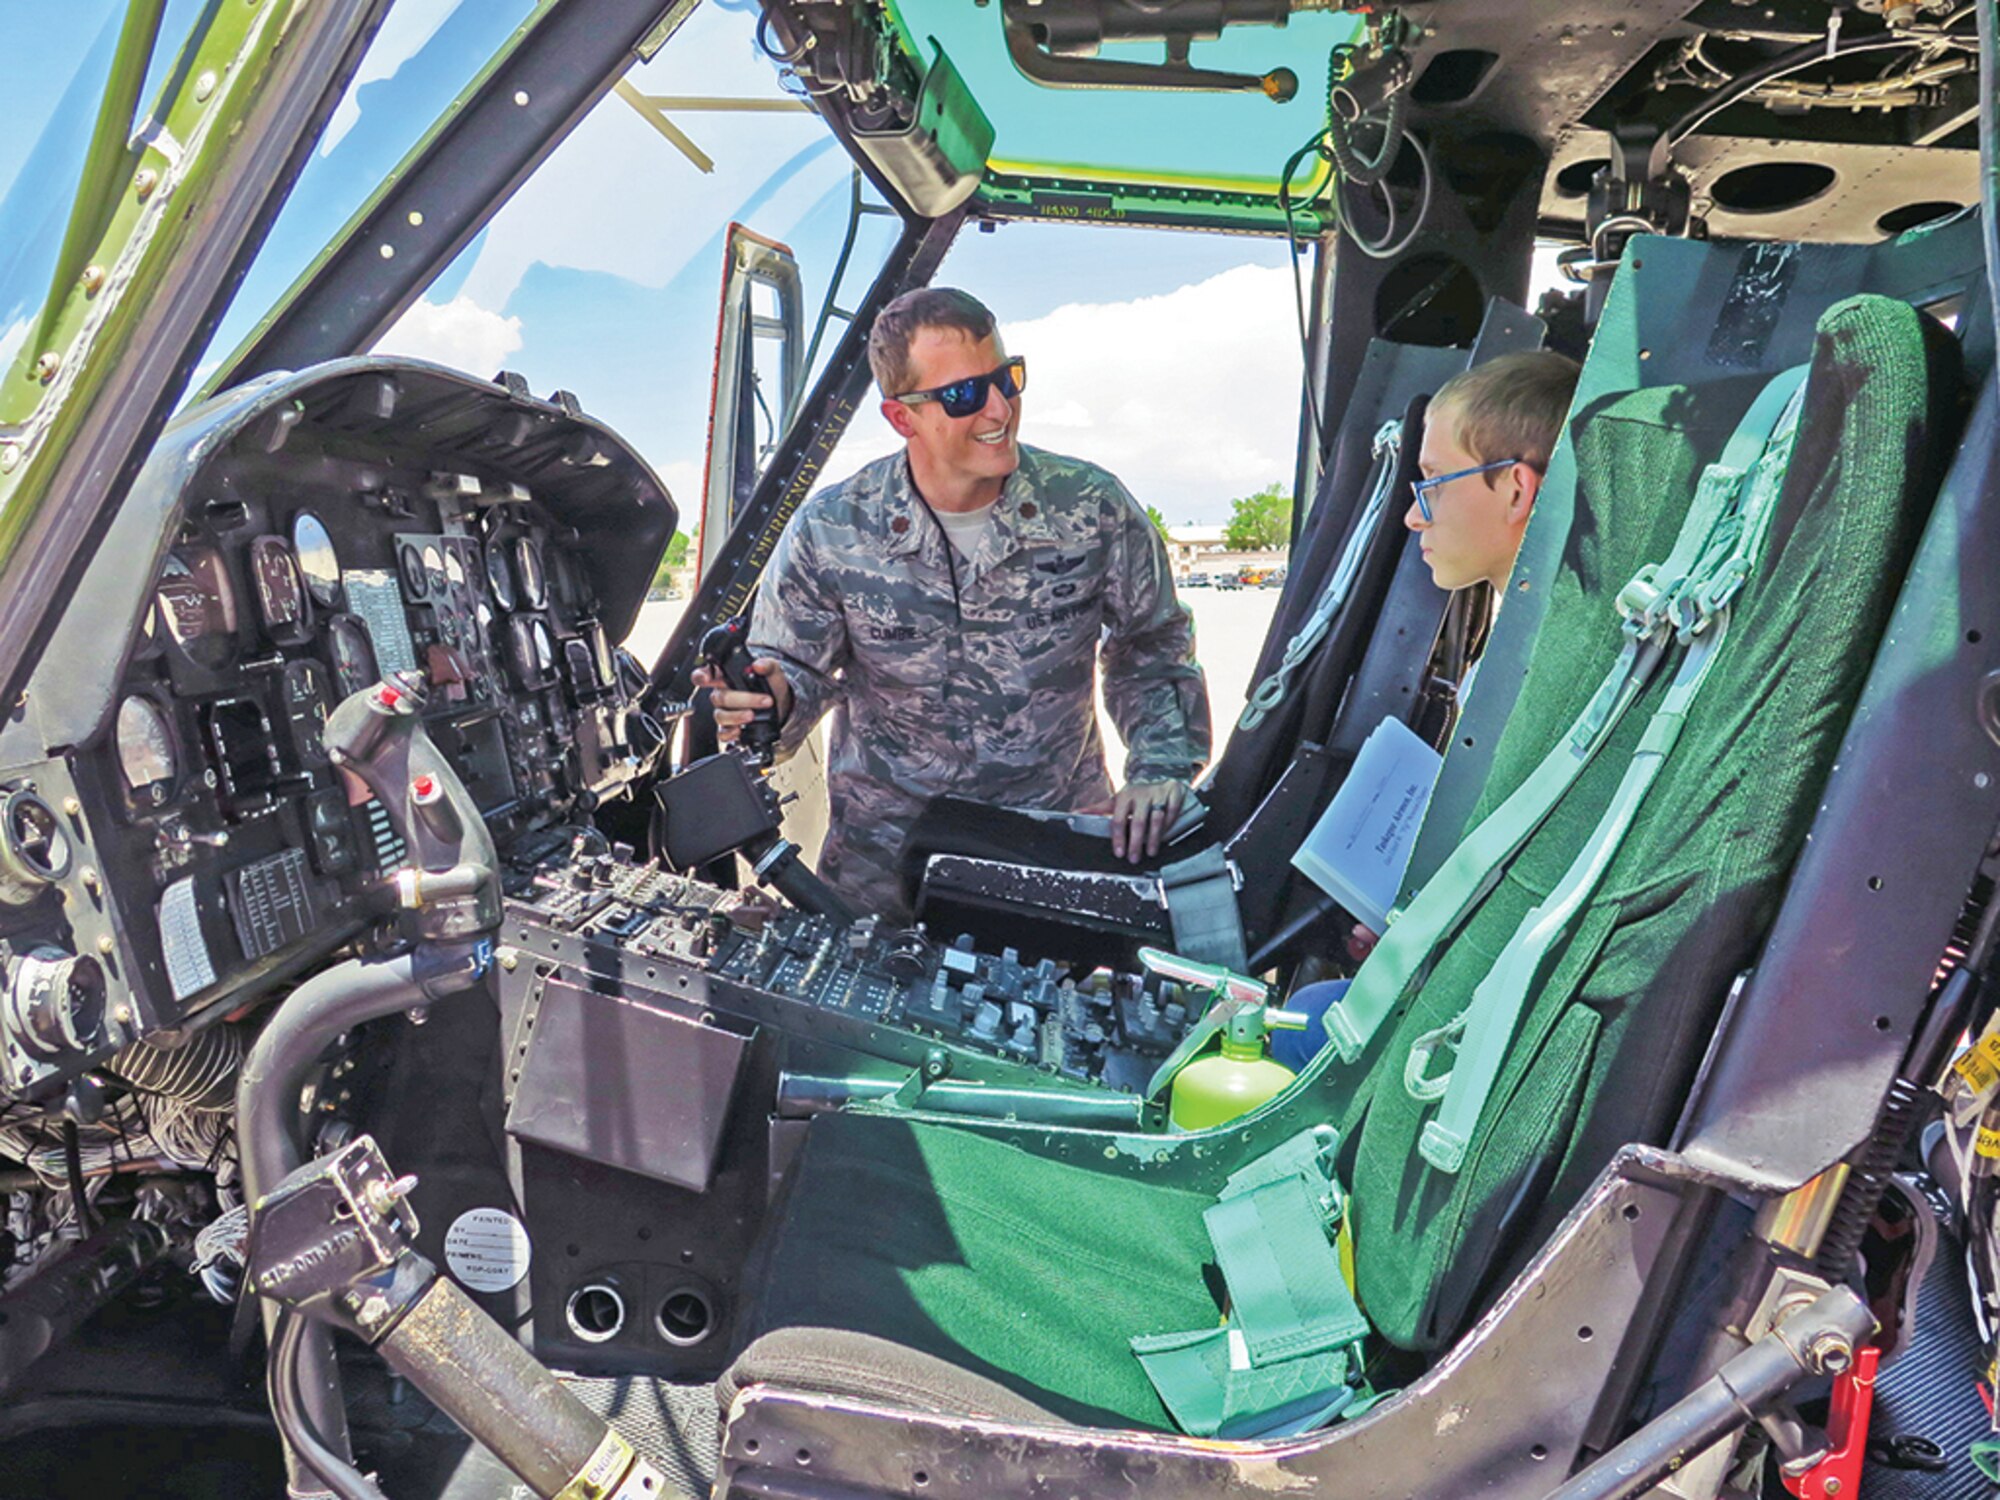 Maj. Frank Cumble, 58th Special Operations Wing, shows Seth Knudsen around the cockpit of a Huey helicopter on Kirtland's flightline. 